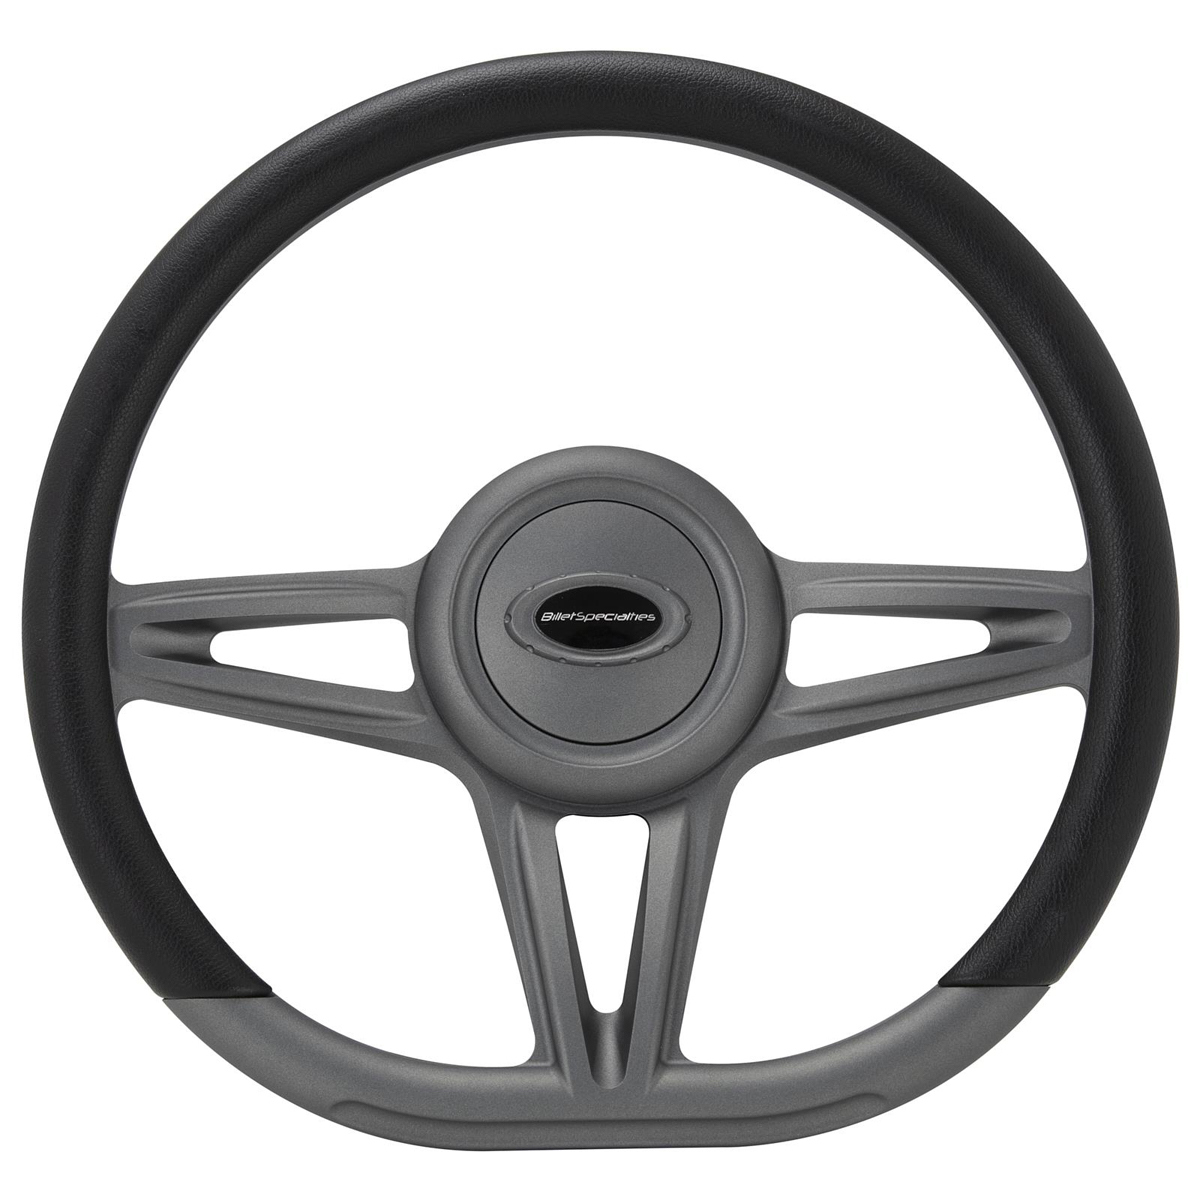 Billet Specialities 294411 Steering Wheel, Victory, D-Shape, 14 in Diameter, 2 in Dish, 3-Spoke, Milled Finger Notches, Aluminum, Gray Anodized, Each